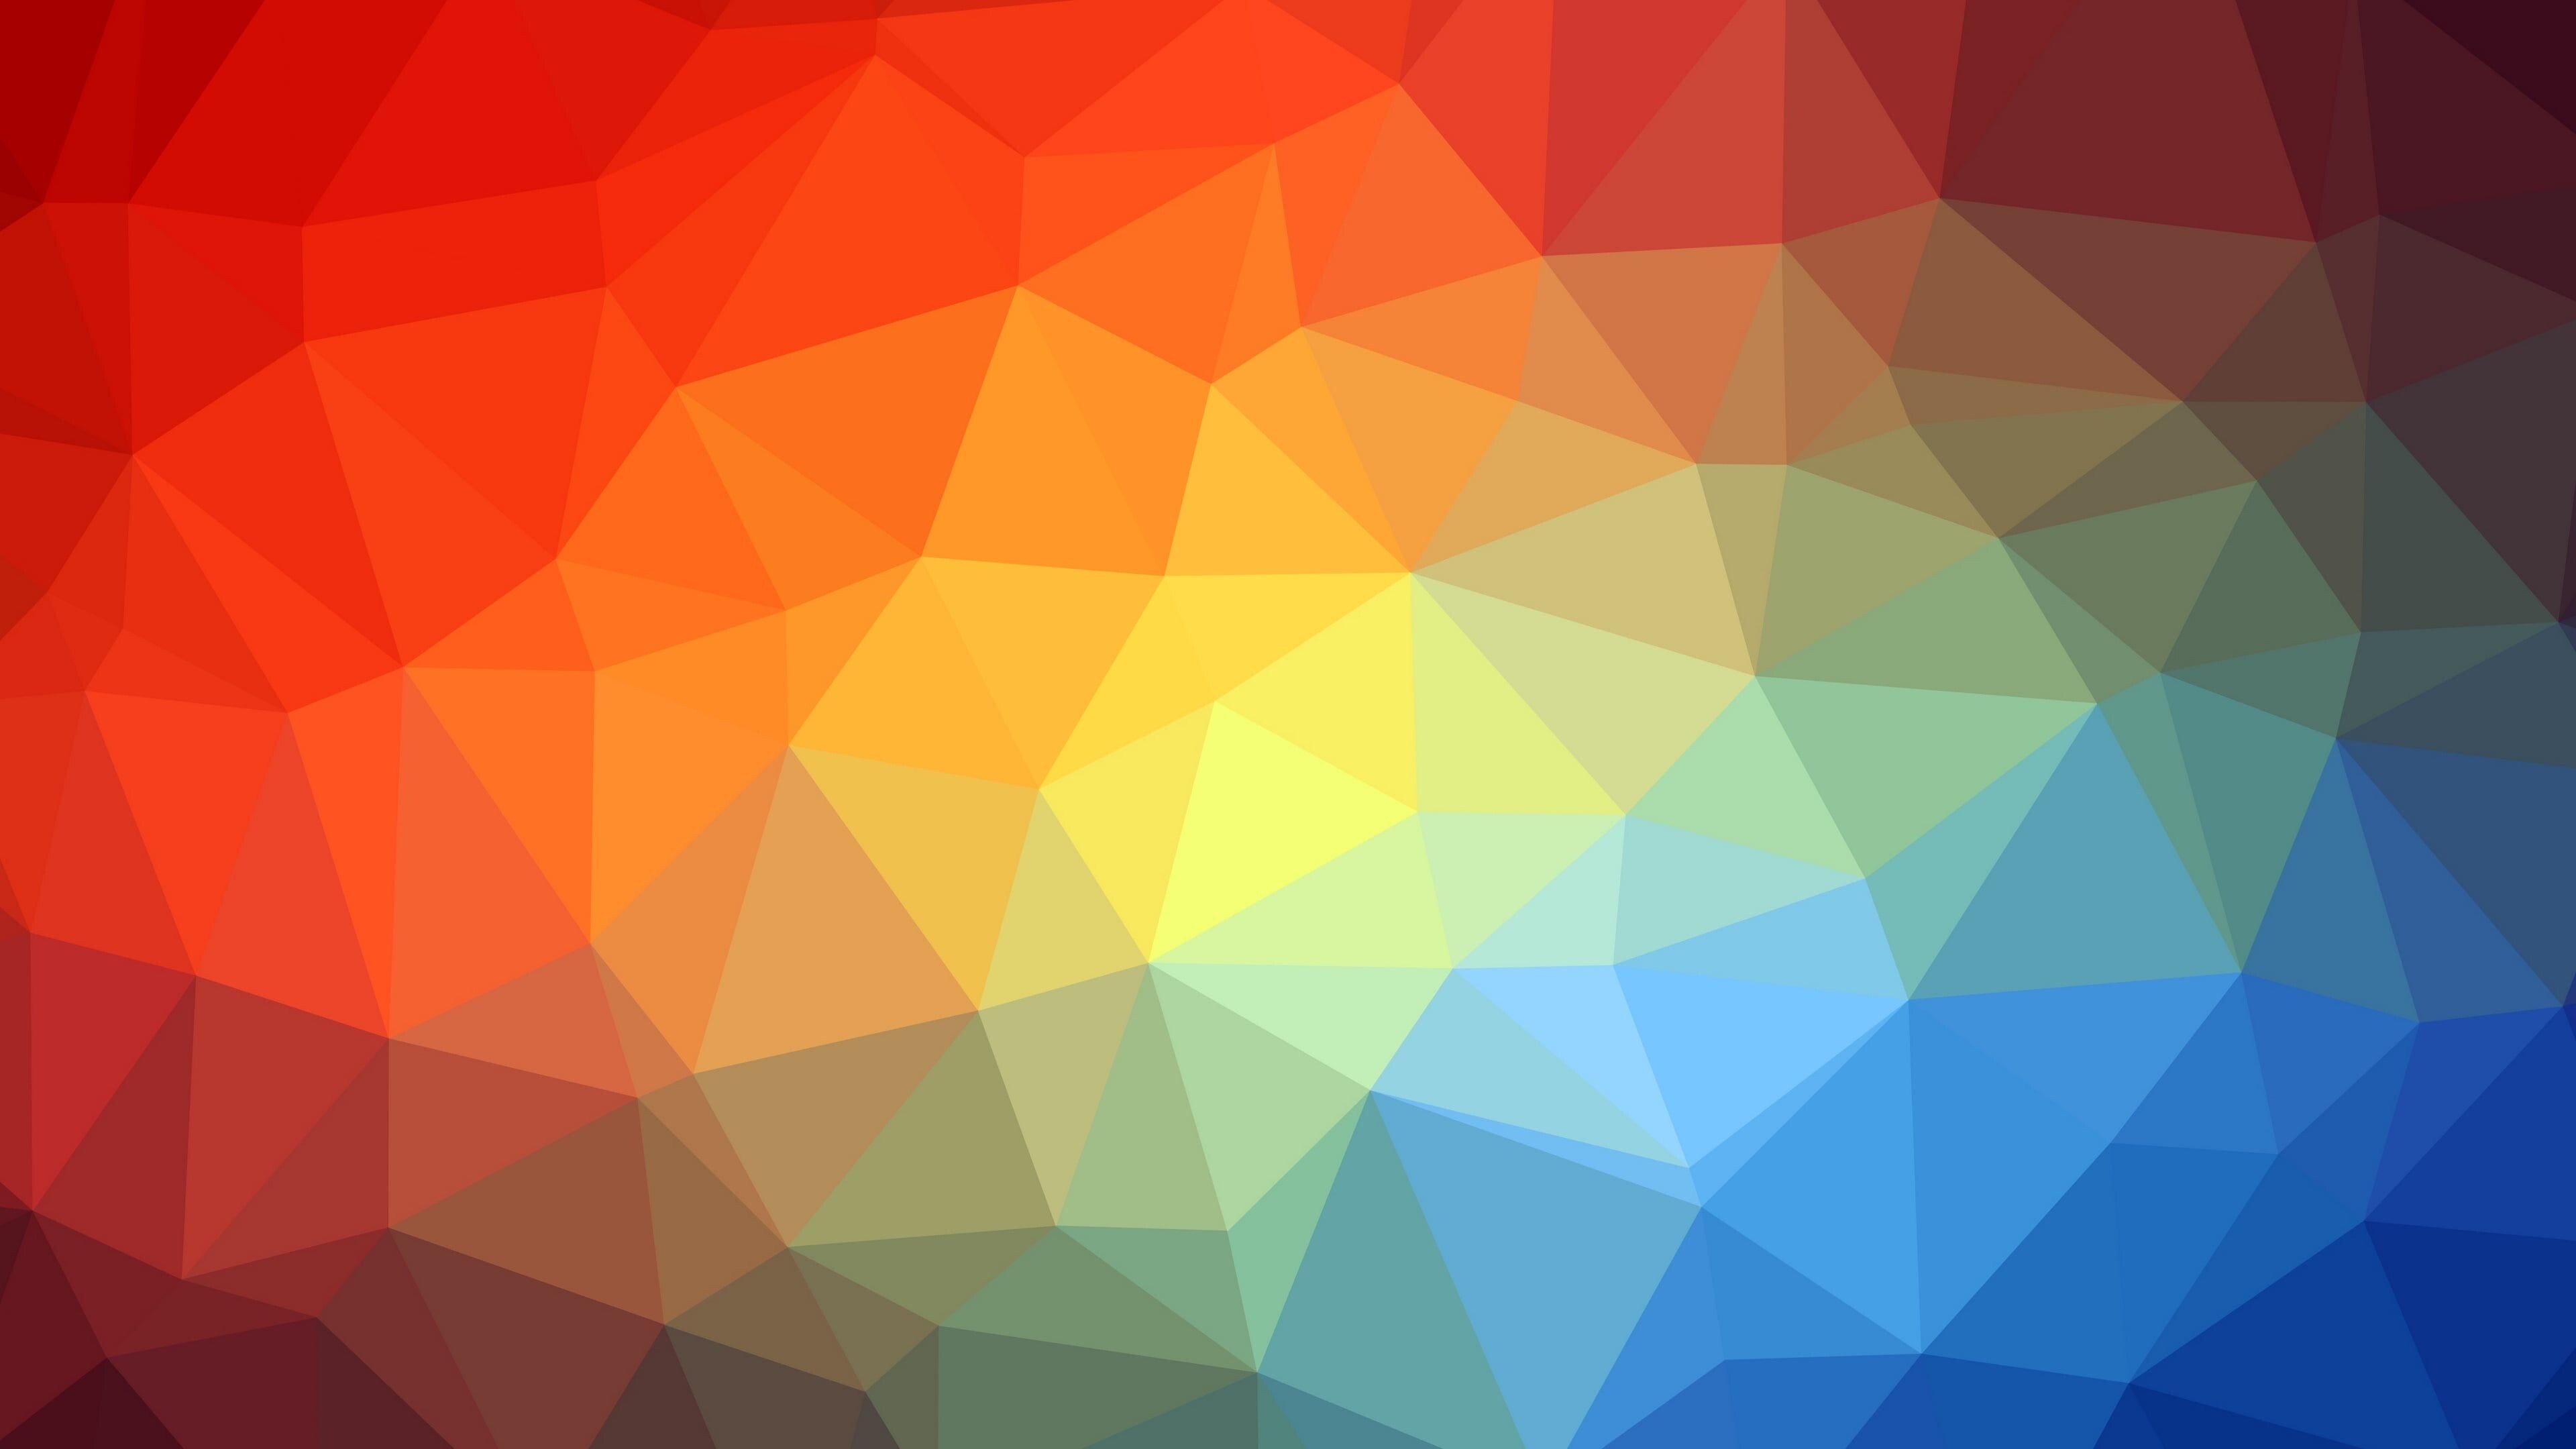 Geometric Abstract: Reflex angles, Equilateral triangles, Rainbow. 3840x2160 4K Background.